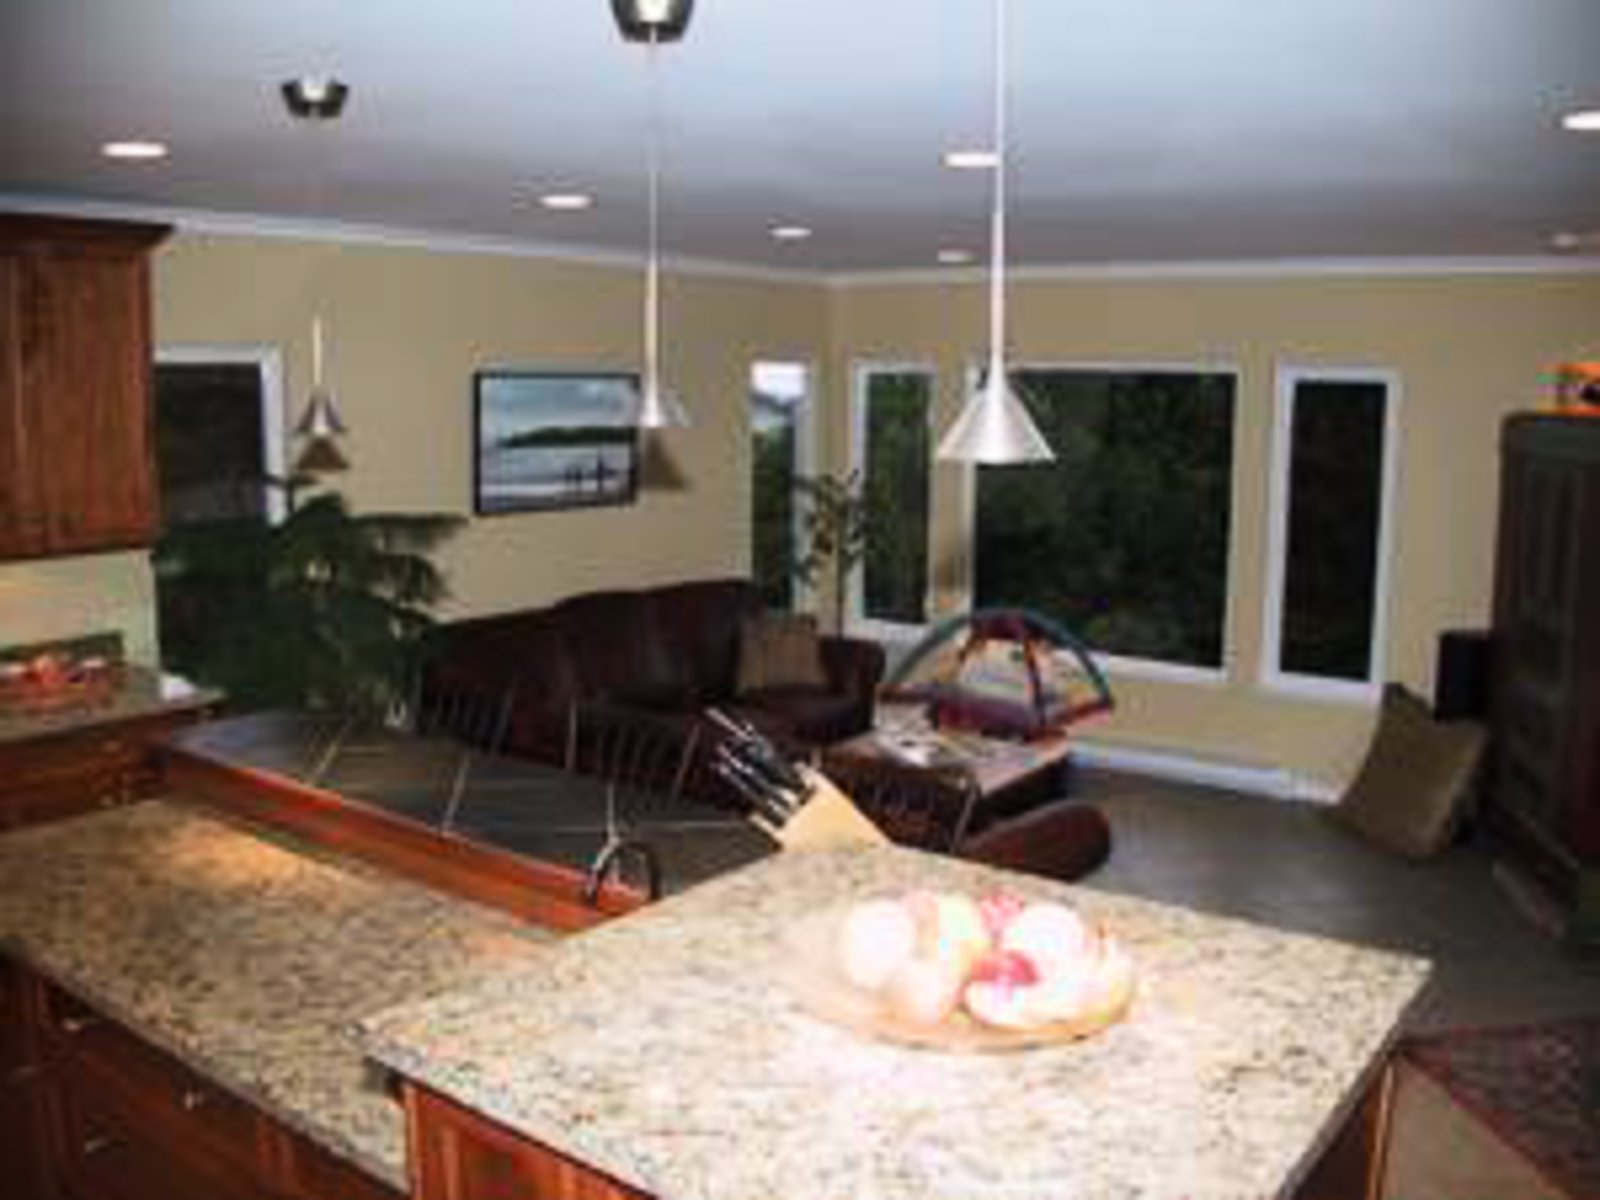 Kitchen Granite countertops, halogen and pot lighting connecting to spacious family room